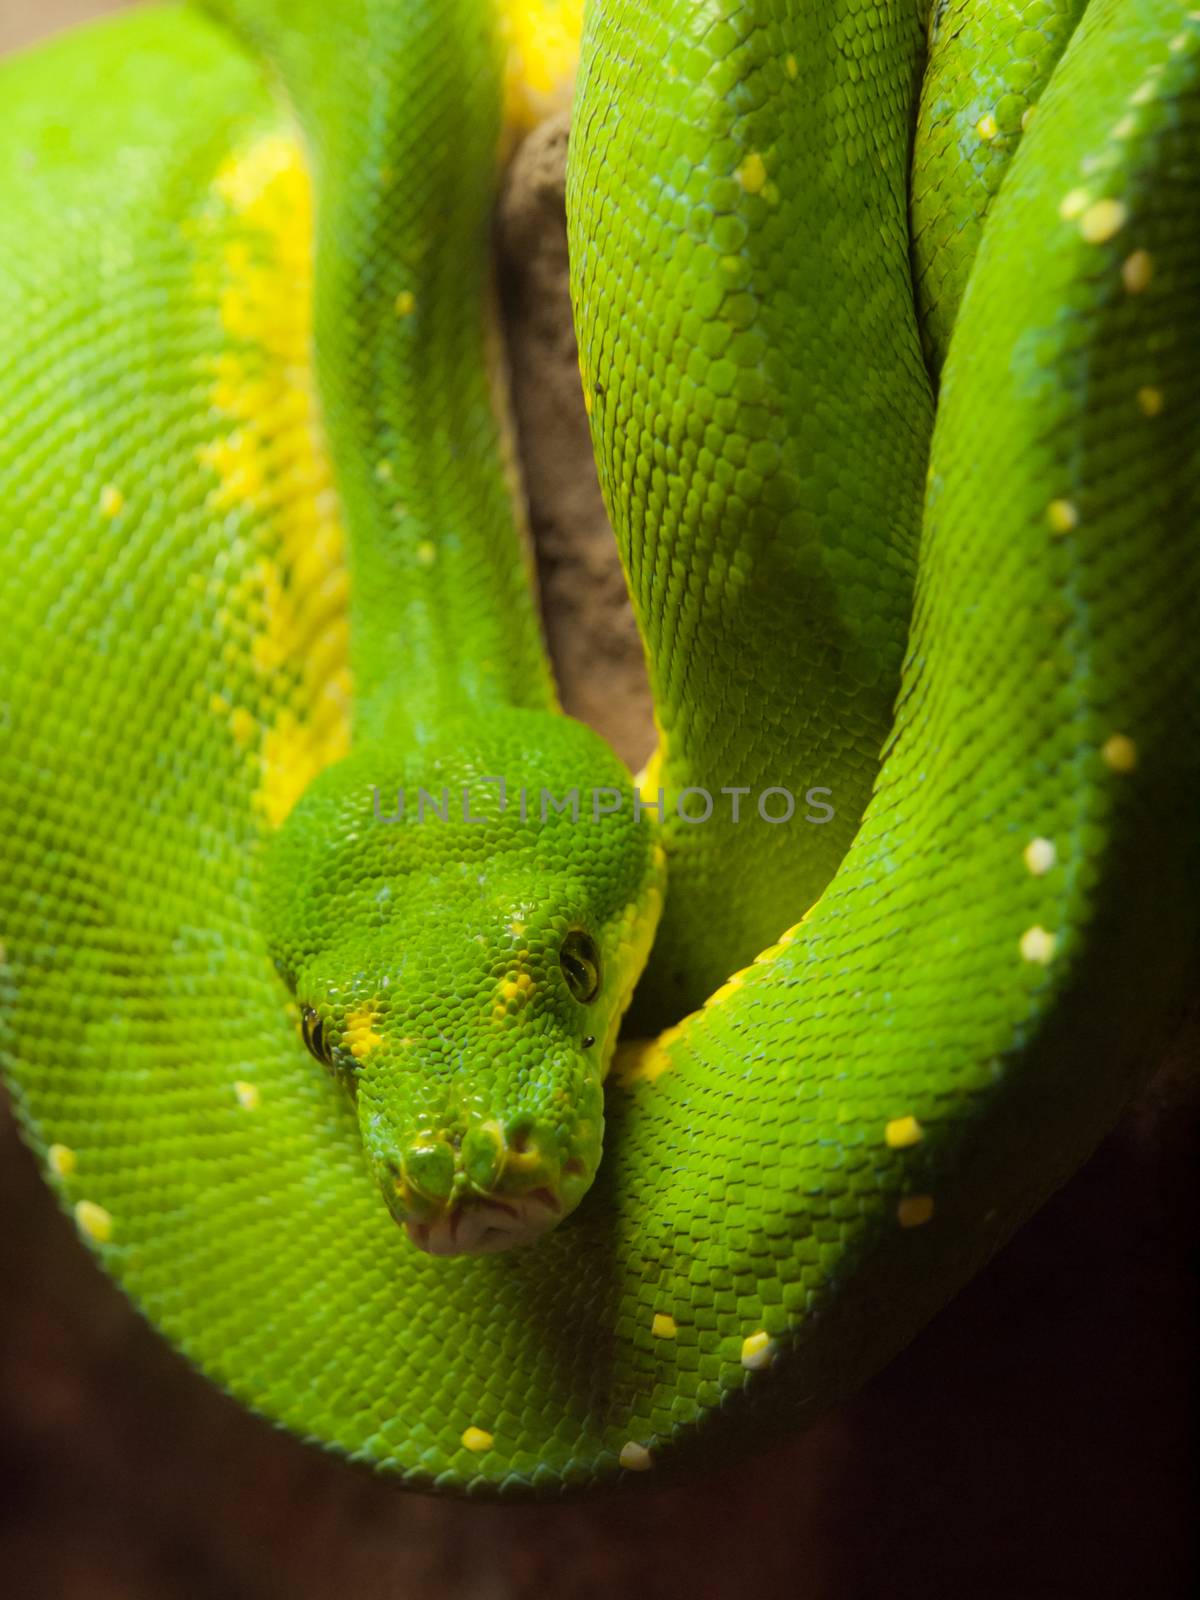 Green tree python by pyty